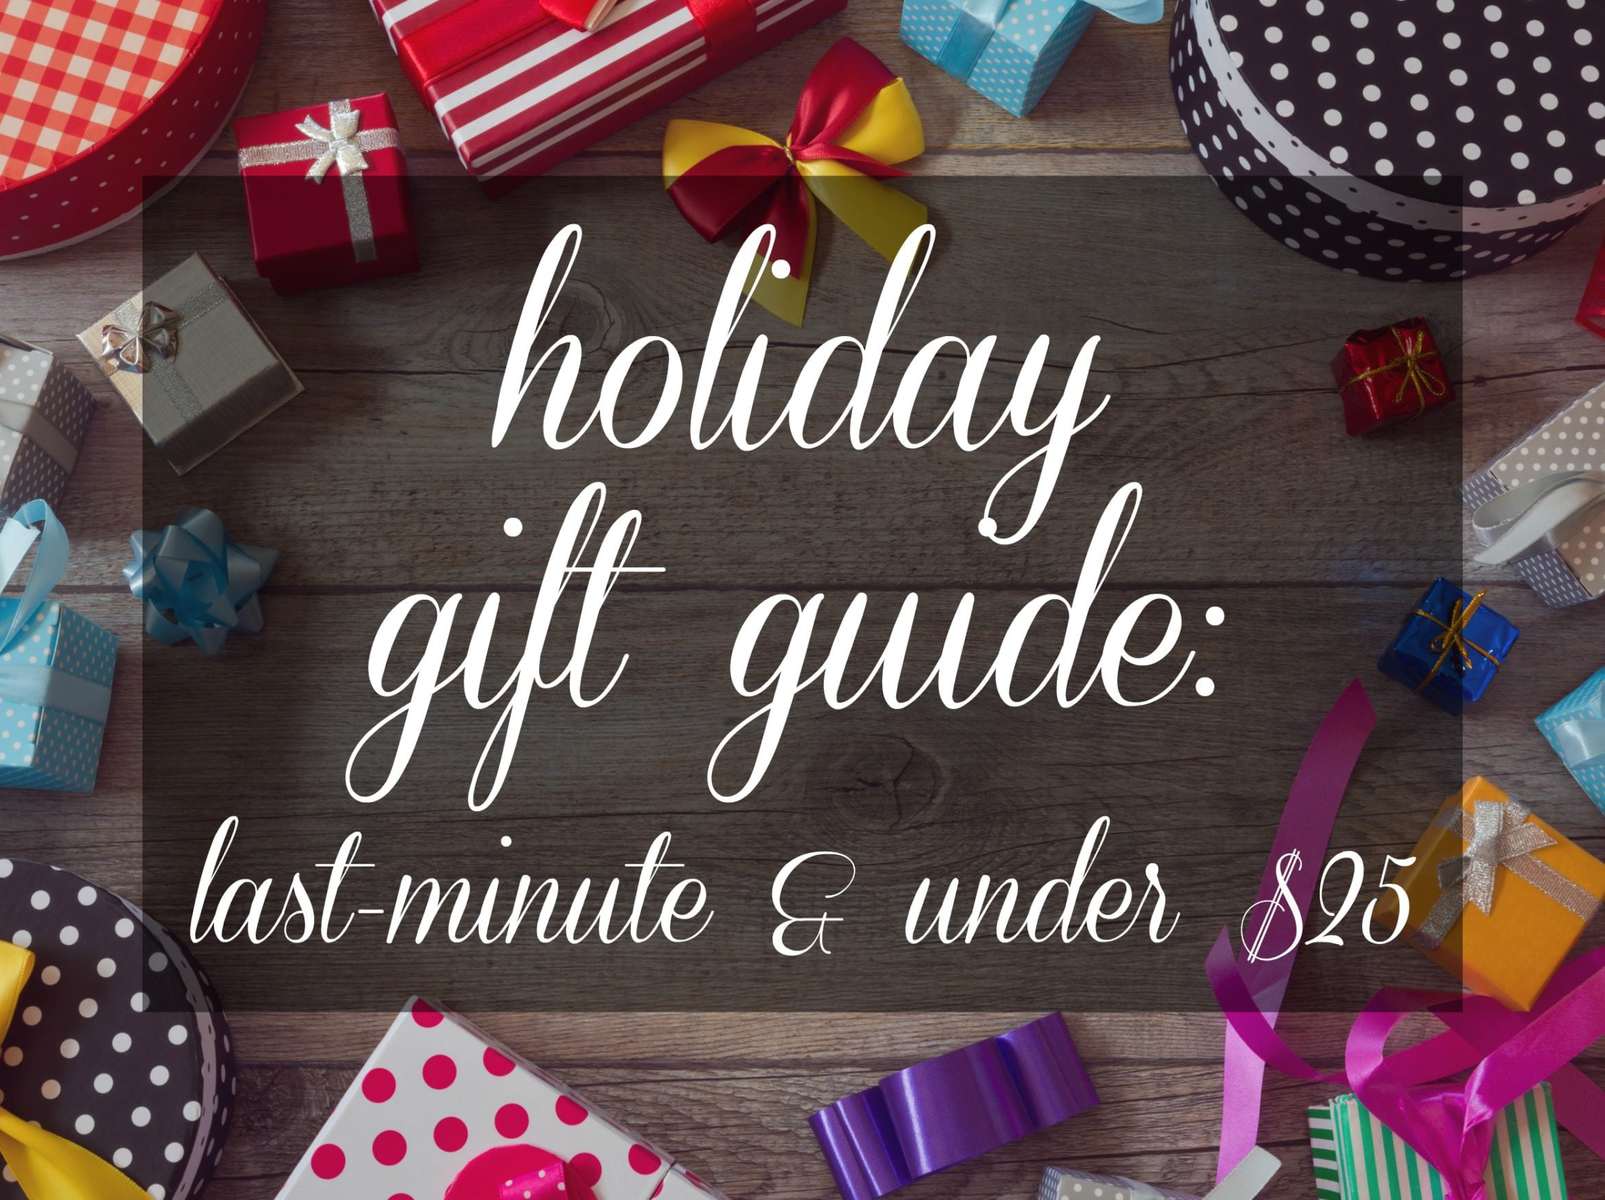 Last Minute Gift Ideas - Free Shipping and Will Arrive in time for Christmas!